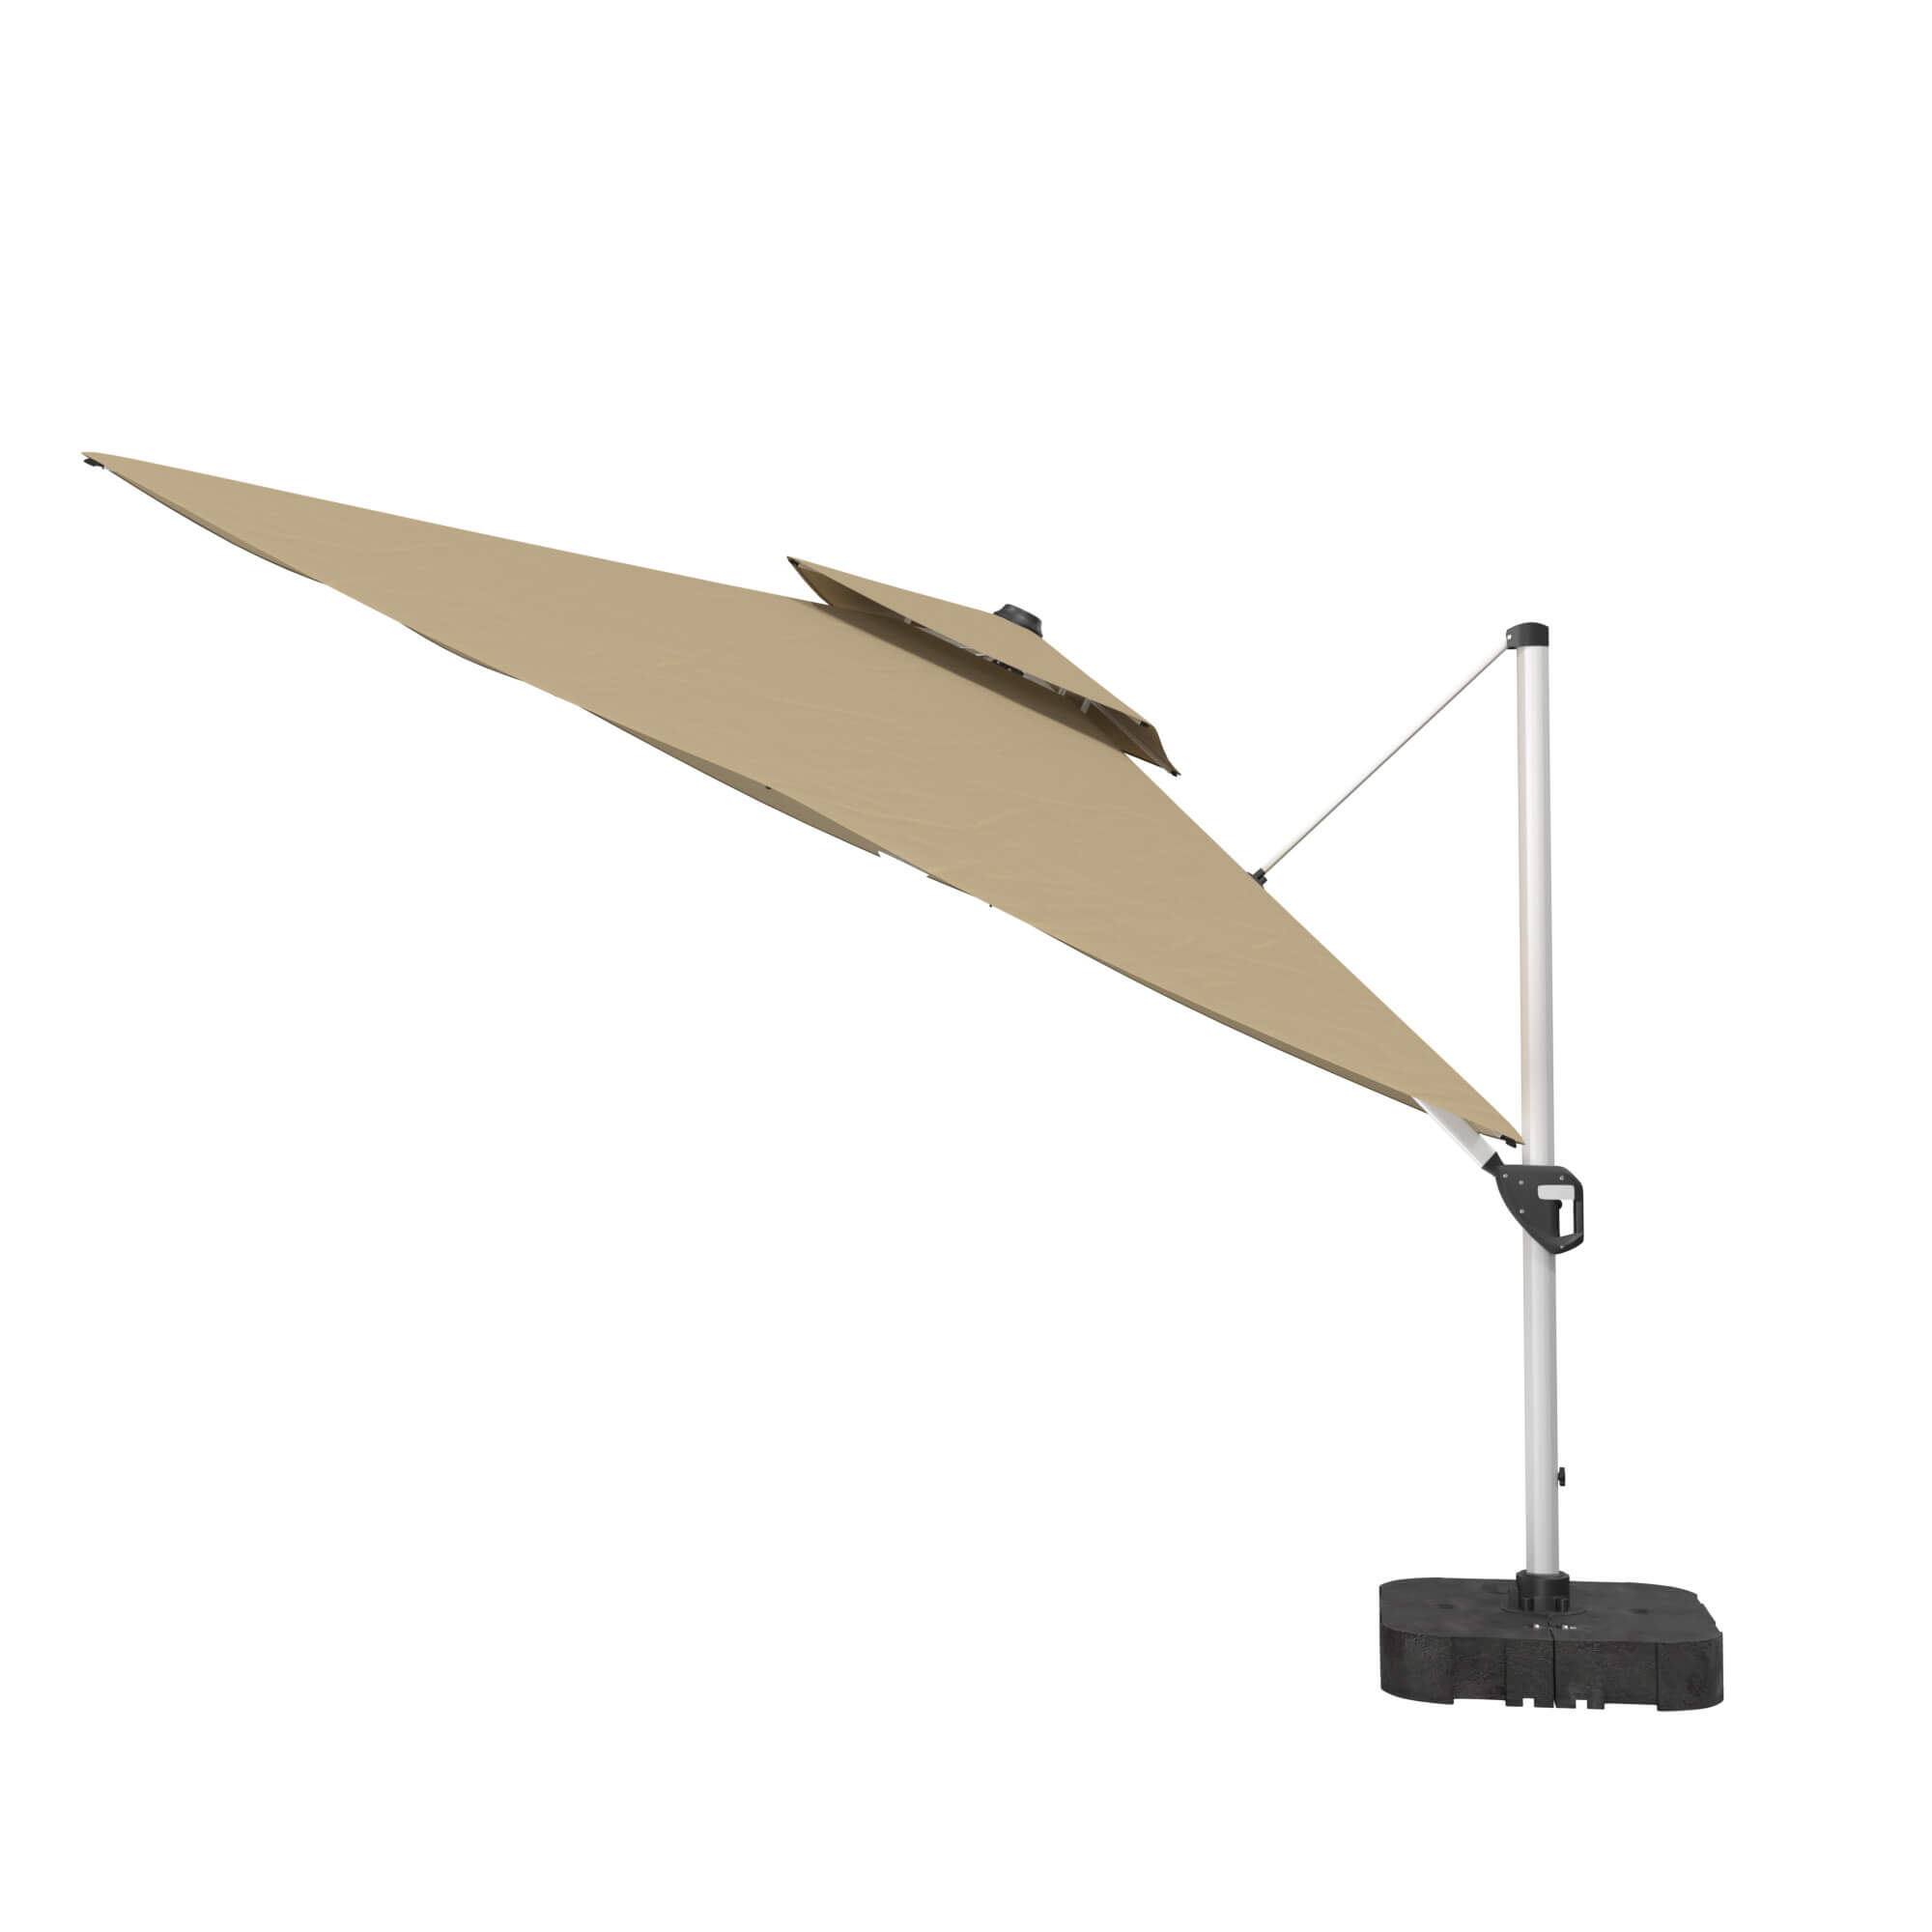 CASAINC 11FT Patio Umbrella Outdoor Square Double Top Umbrella with LED light (with Base)